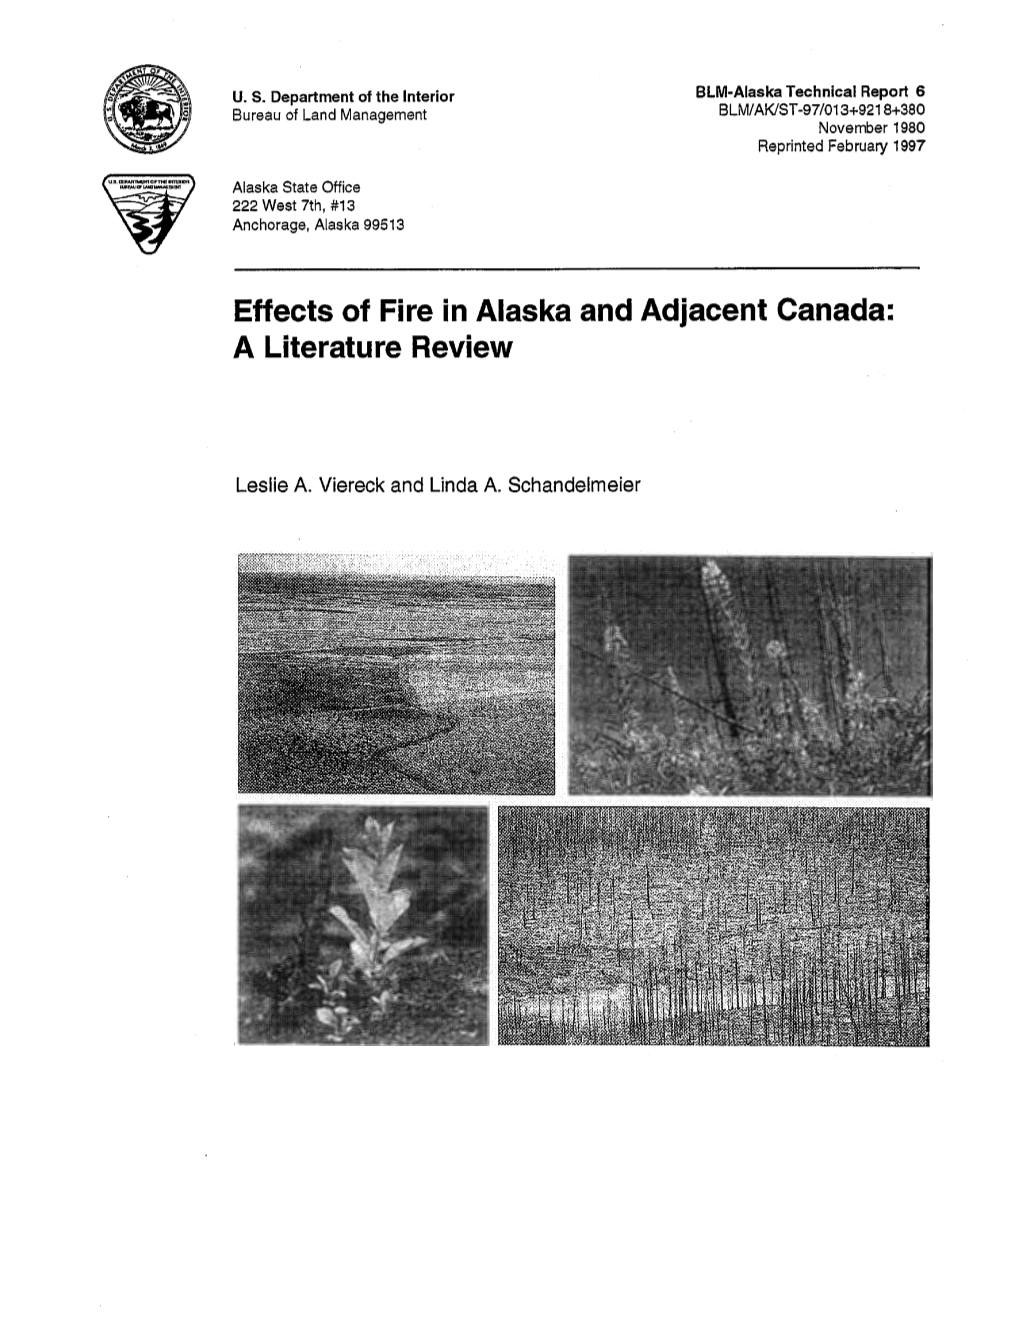 Effects of Fire in Alaska and Adjacent Canada: a Literature Review